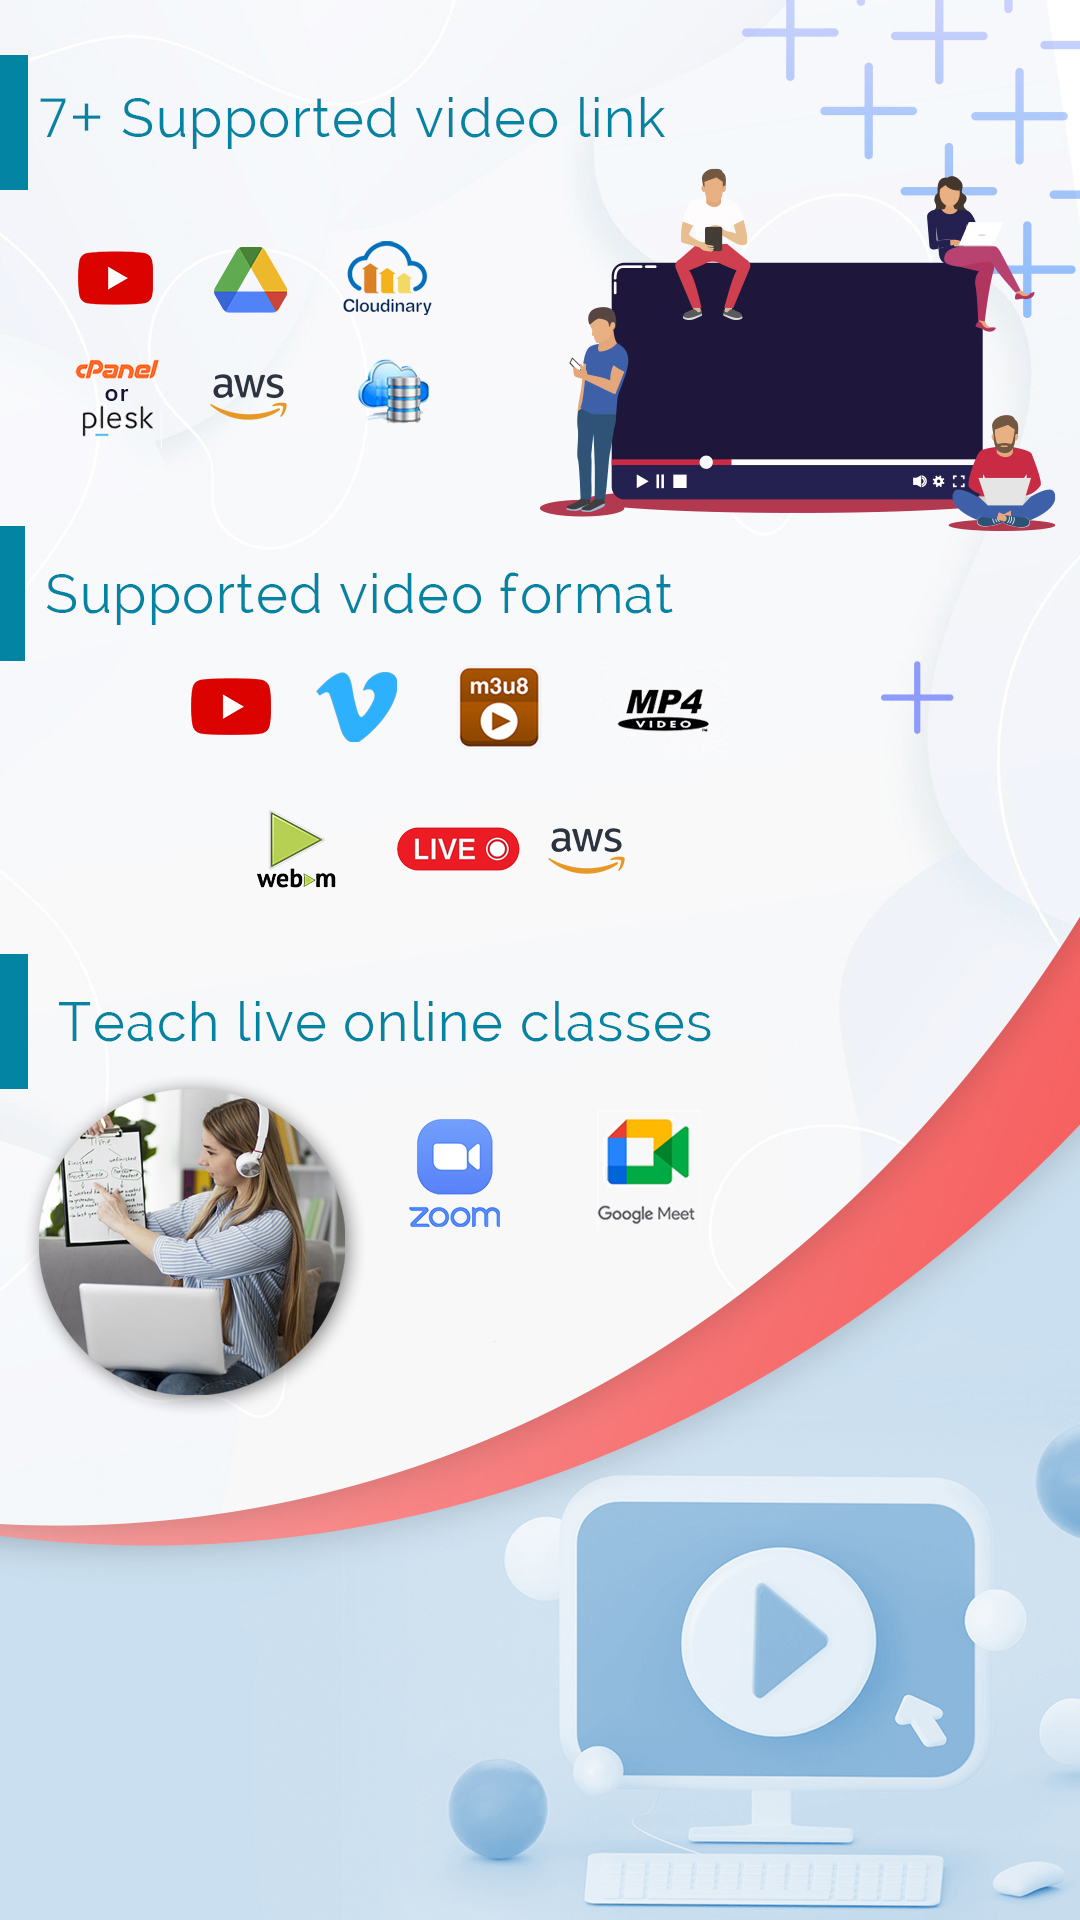 eClass LMS Mobile App - Flutter Android & iOS - 3